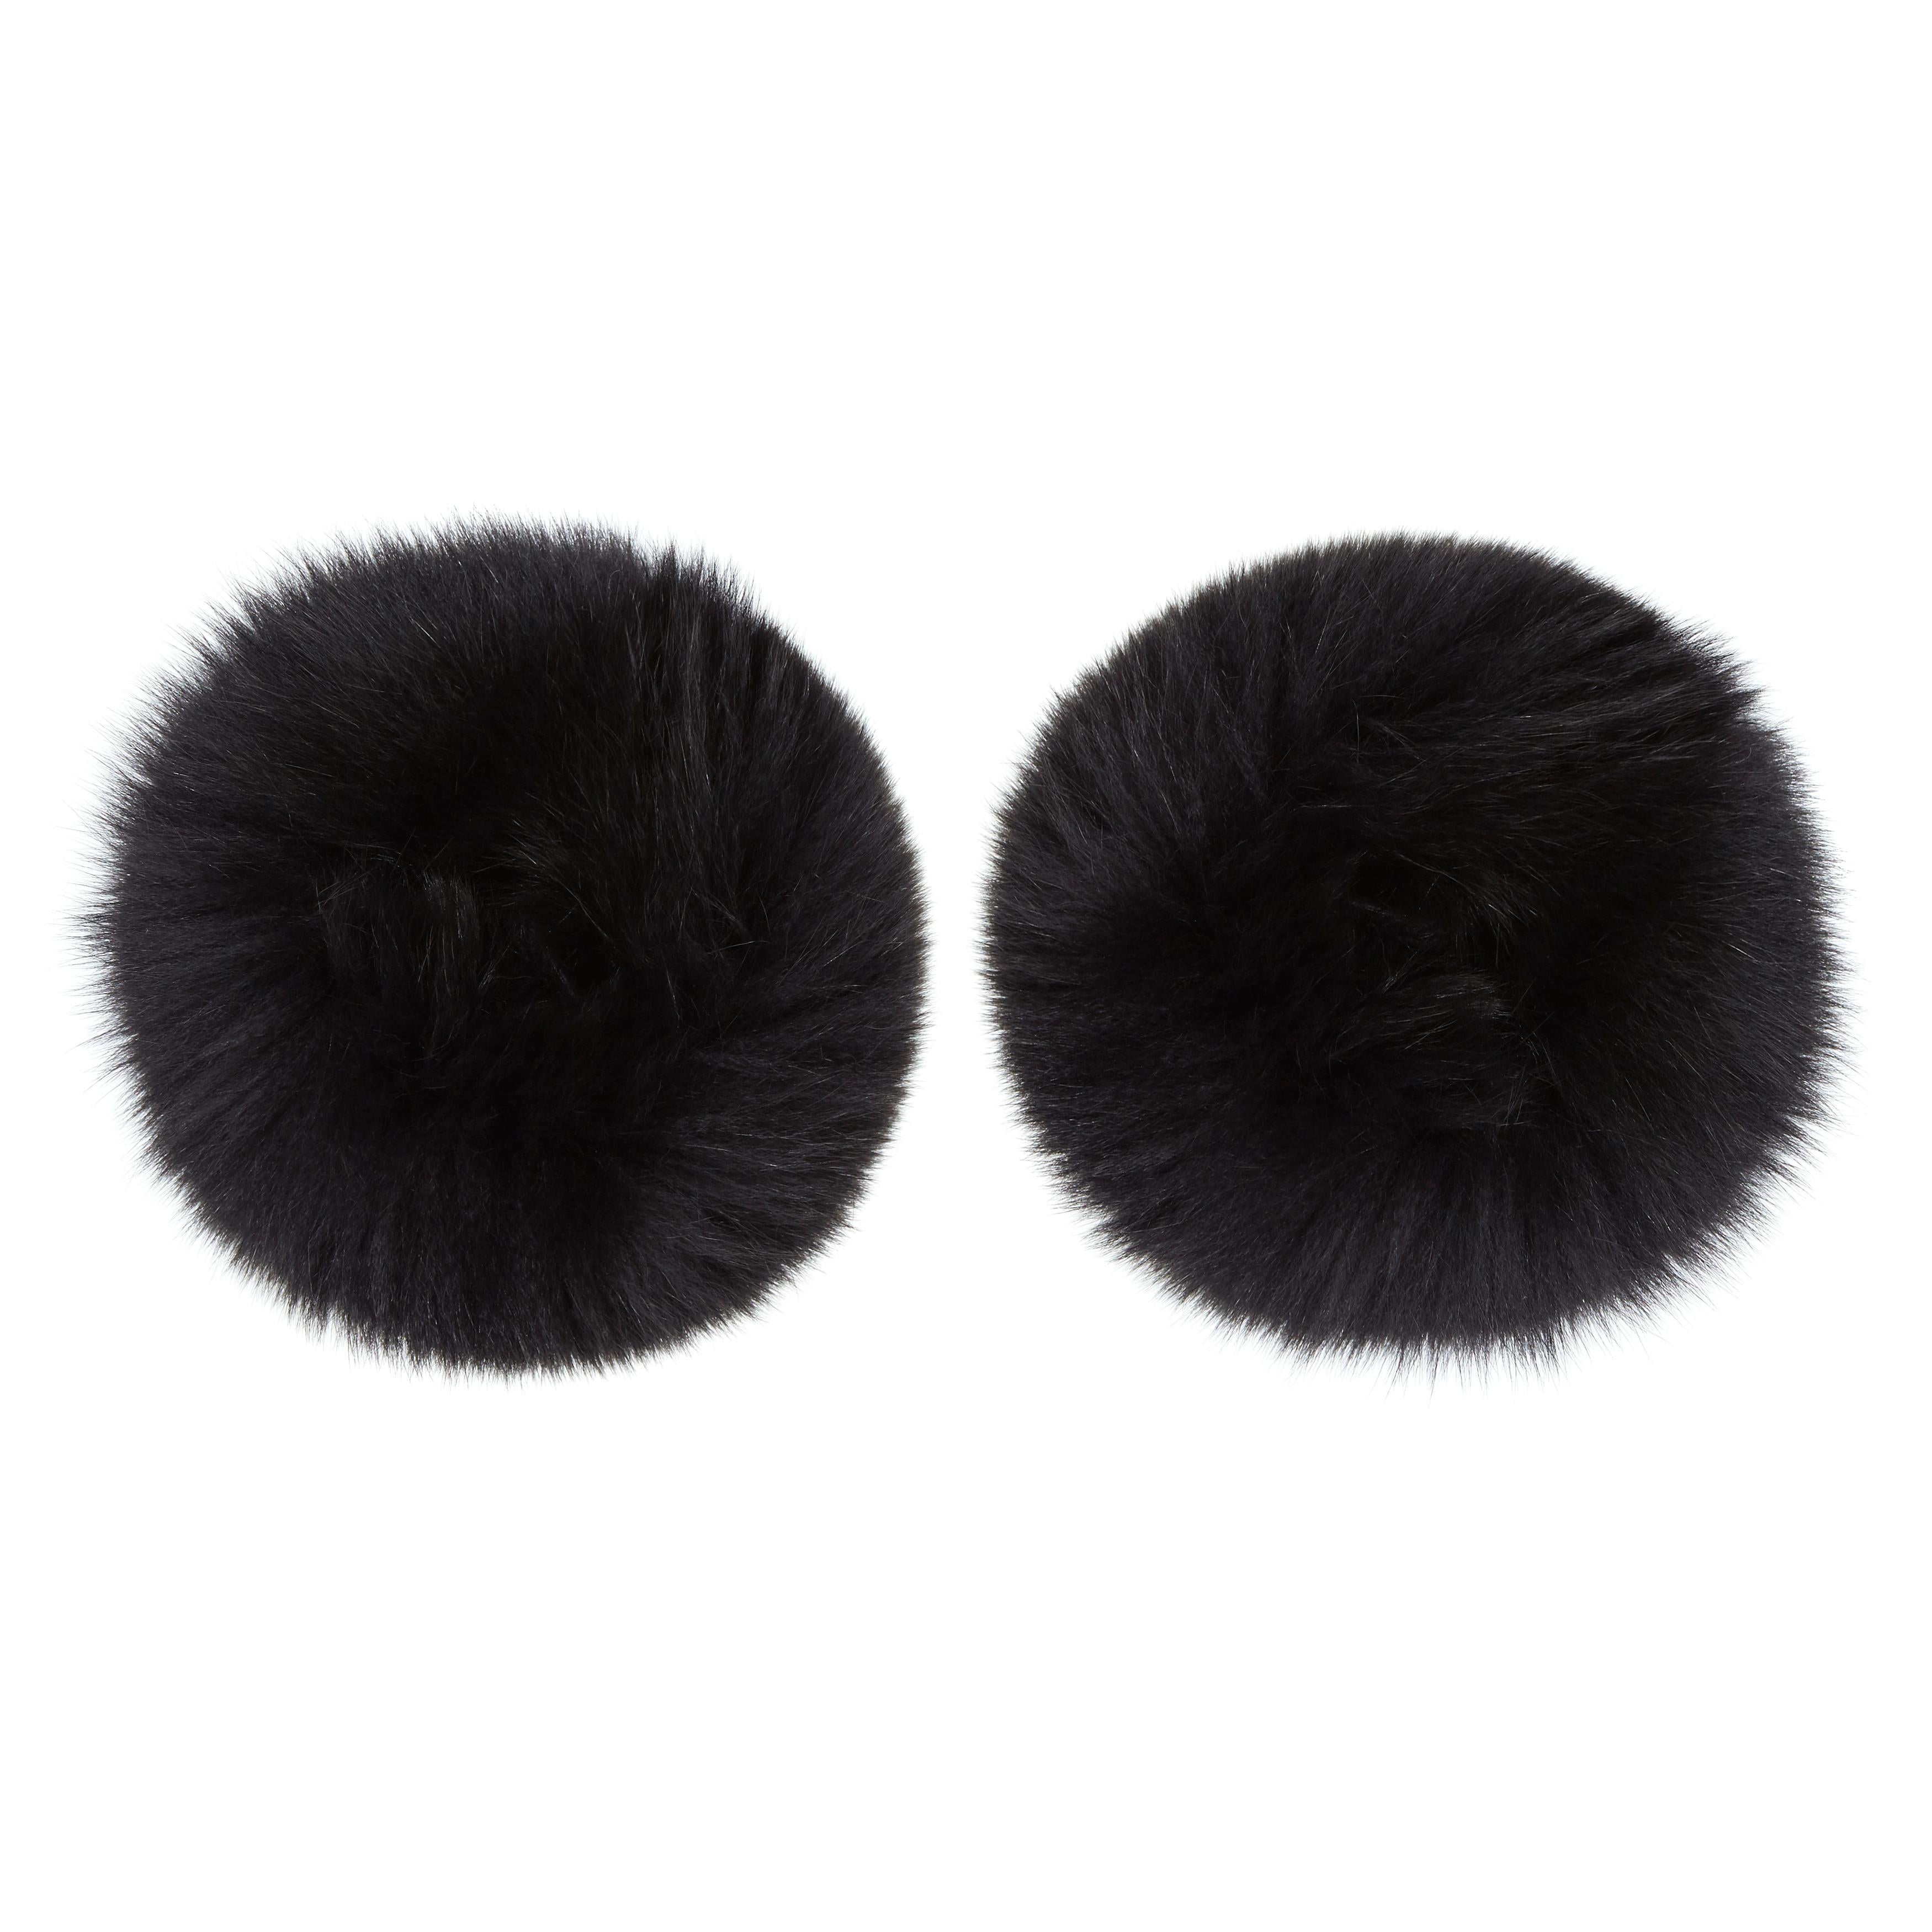 Verheyen London Snap on Fox Cuffs are the perfect accessory for winter/autumn dressing. Wear over any jumper or coat, these cuffs will jazz up any look and keep you staying cosy with style. 




All fur is origin assured and ethically sourced from